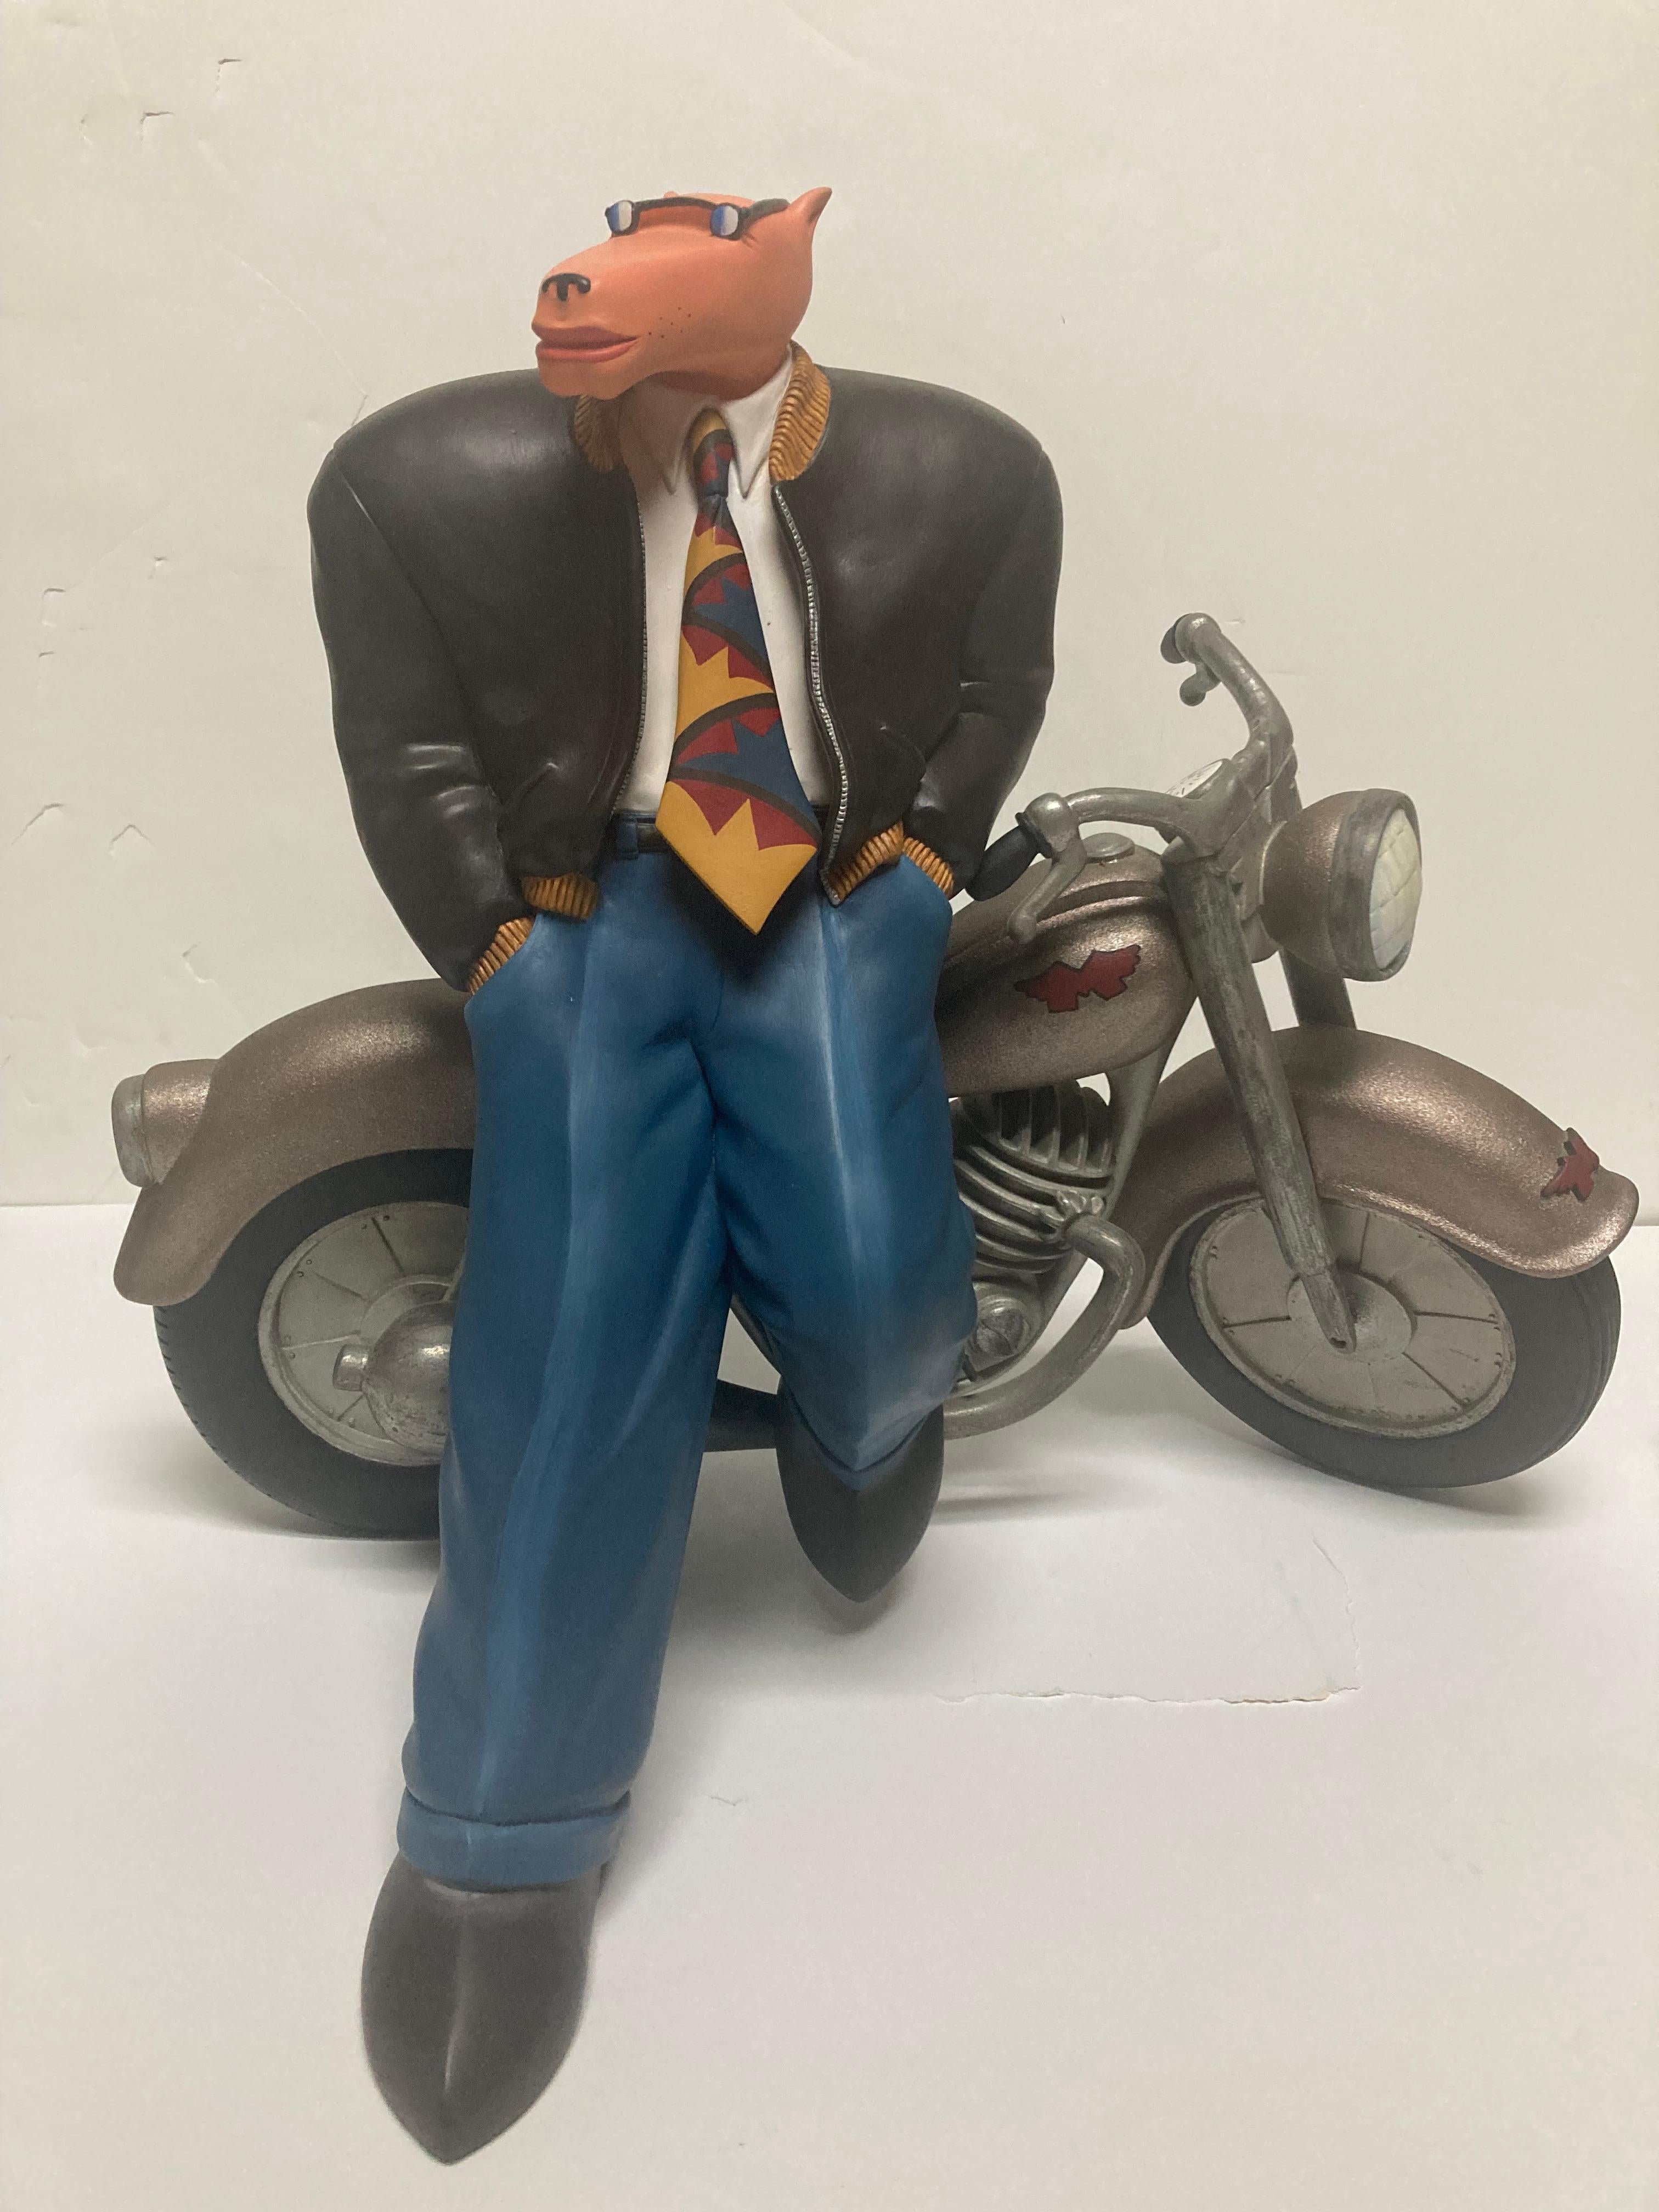 This is a markus Pierson sculpture signed and numbered out of 200. In excellent condition. Biker does come off of his motorcycle it will be separately shipped. Measures 16x19x13